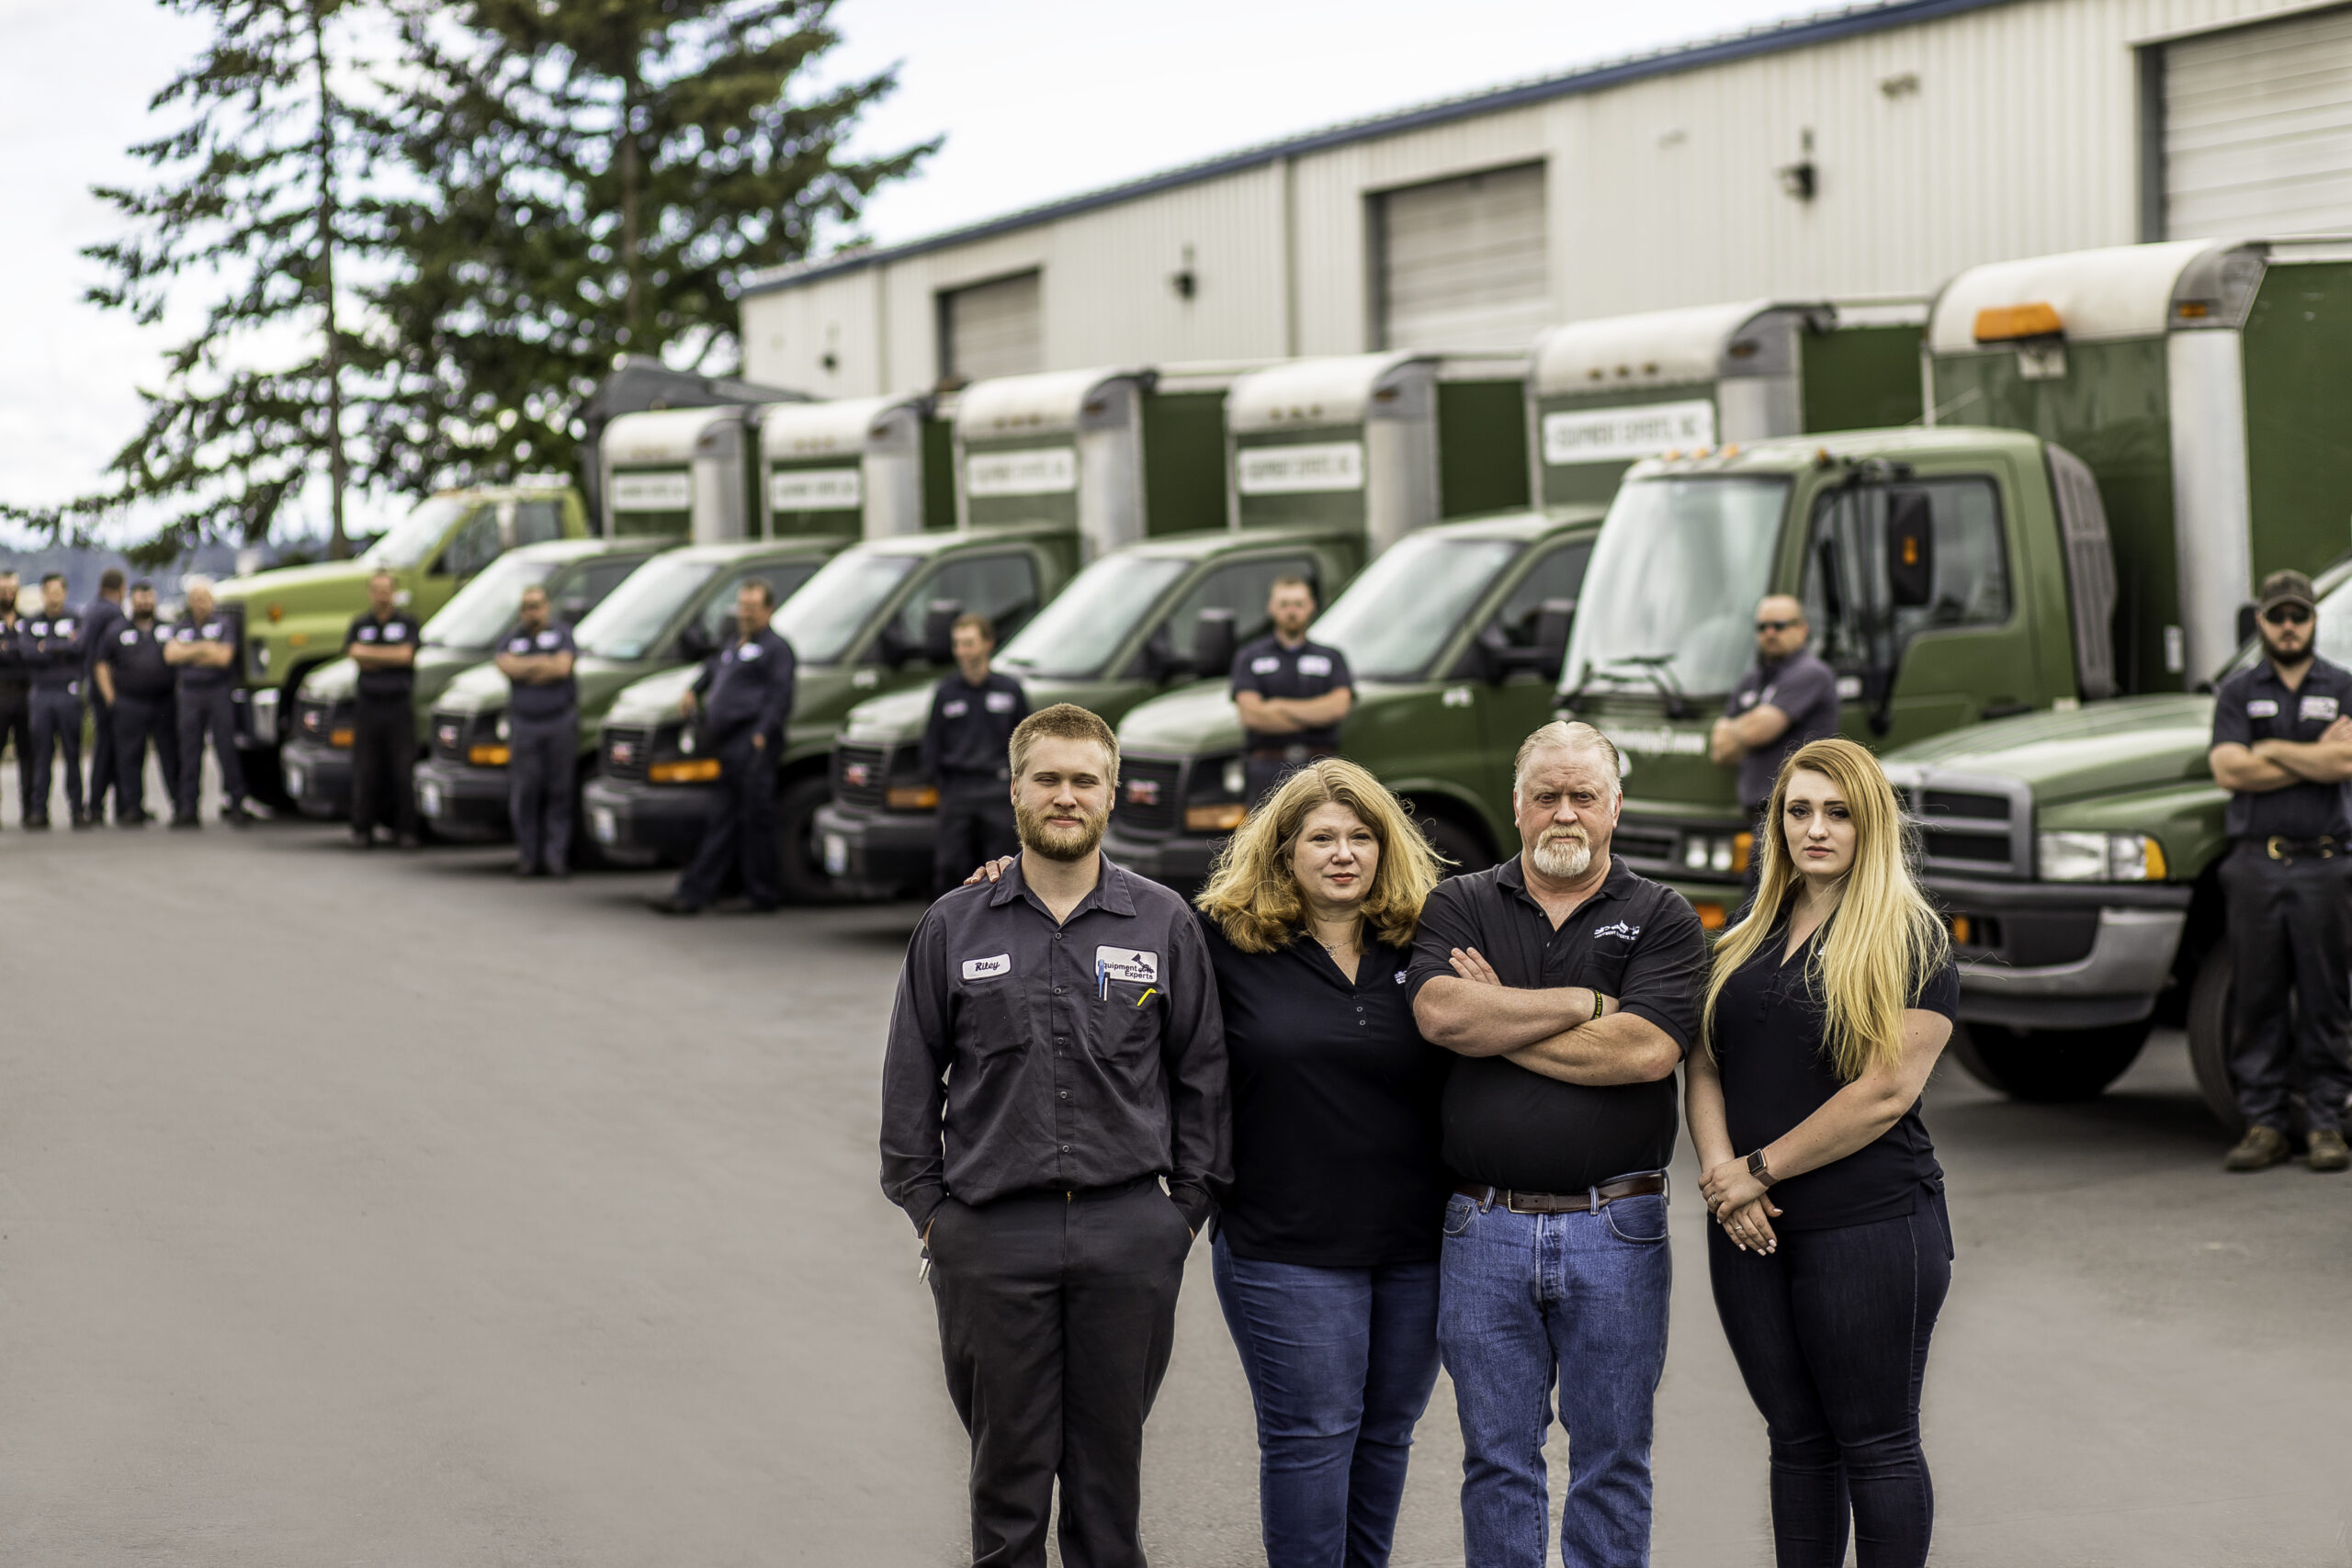 Equipment Experts, Inc. management fleet team with a fleet of truck drivers leaning against trucks in the background